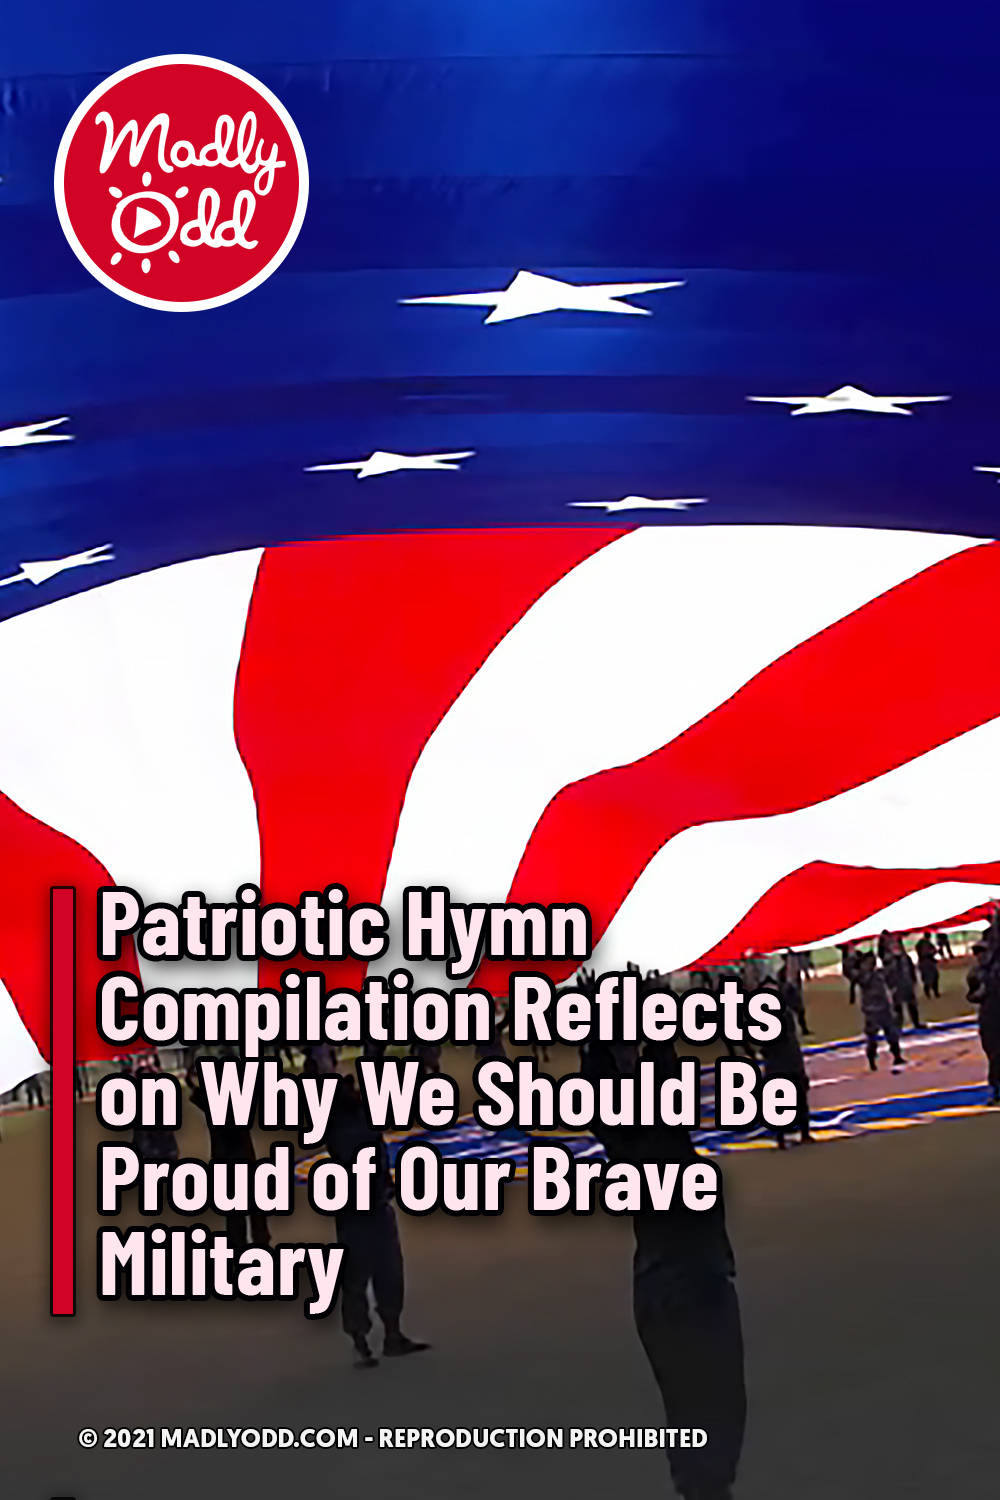 Patriotic Hymn Compilation Reflects on Why We Should Be Proud of Our Brave Military